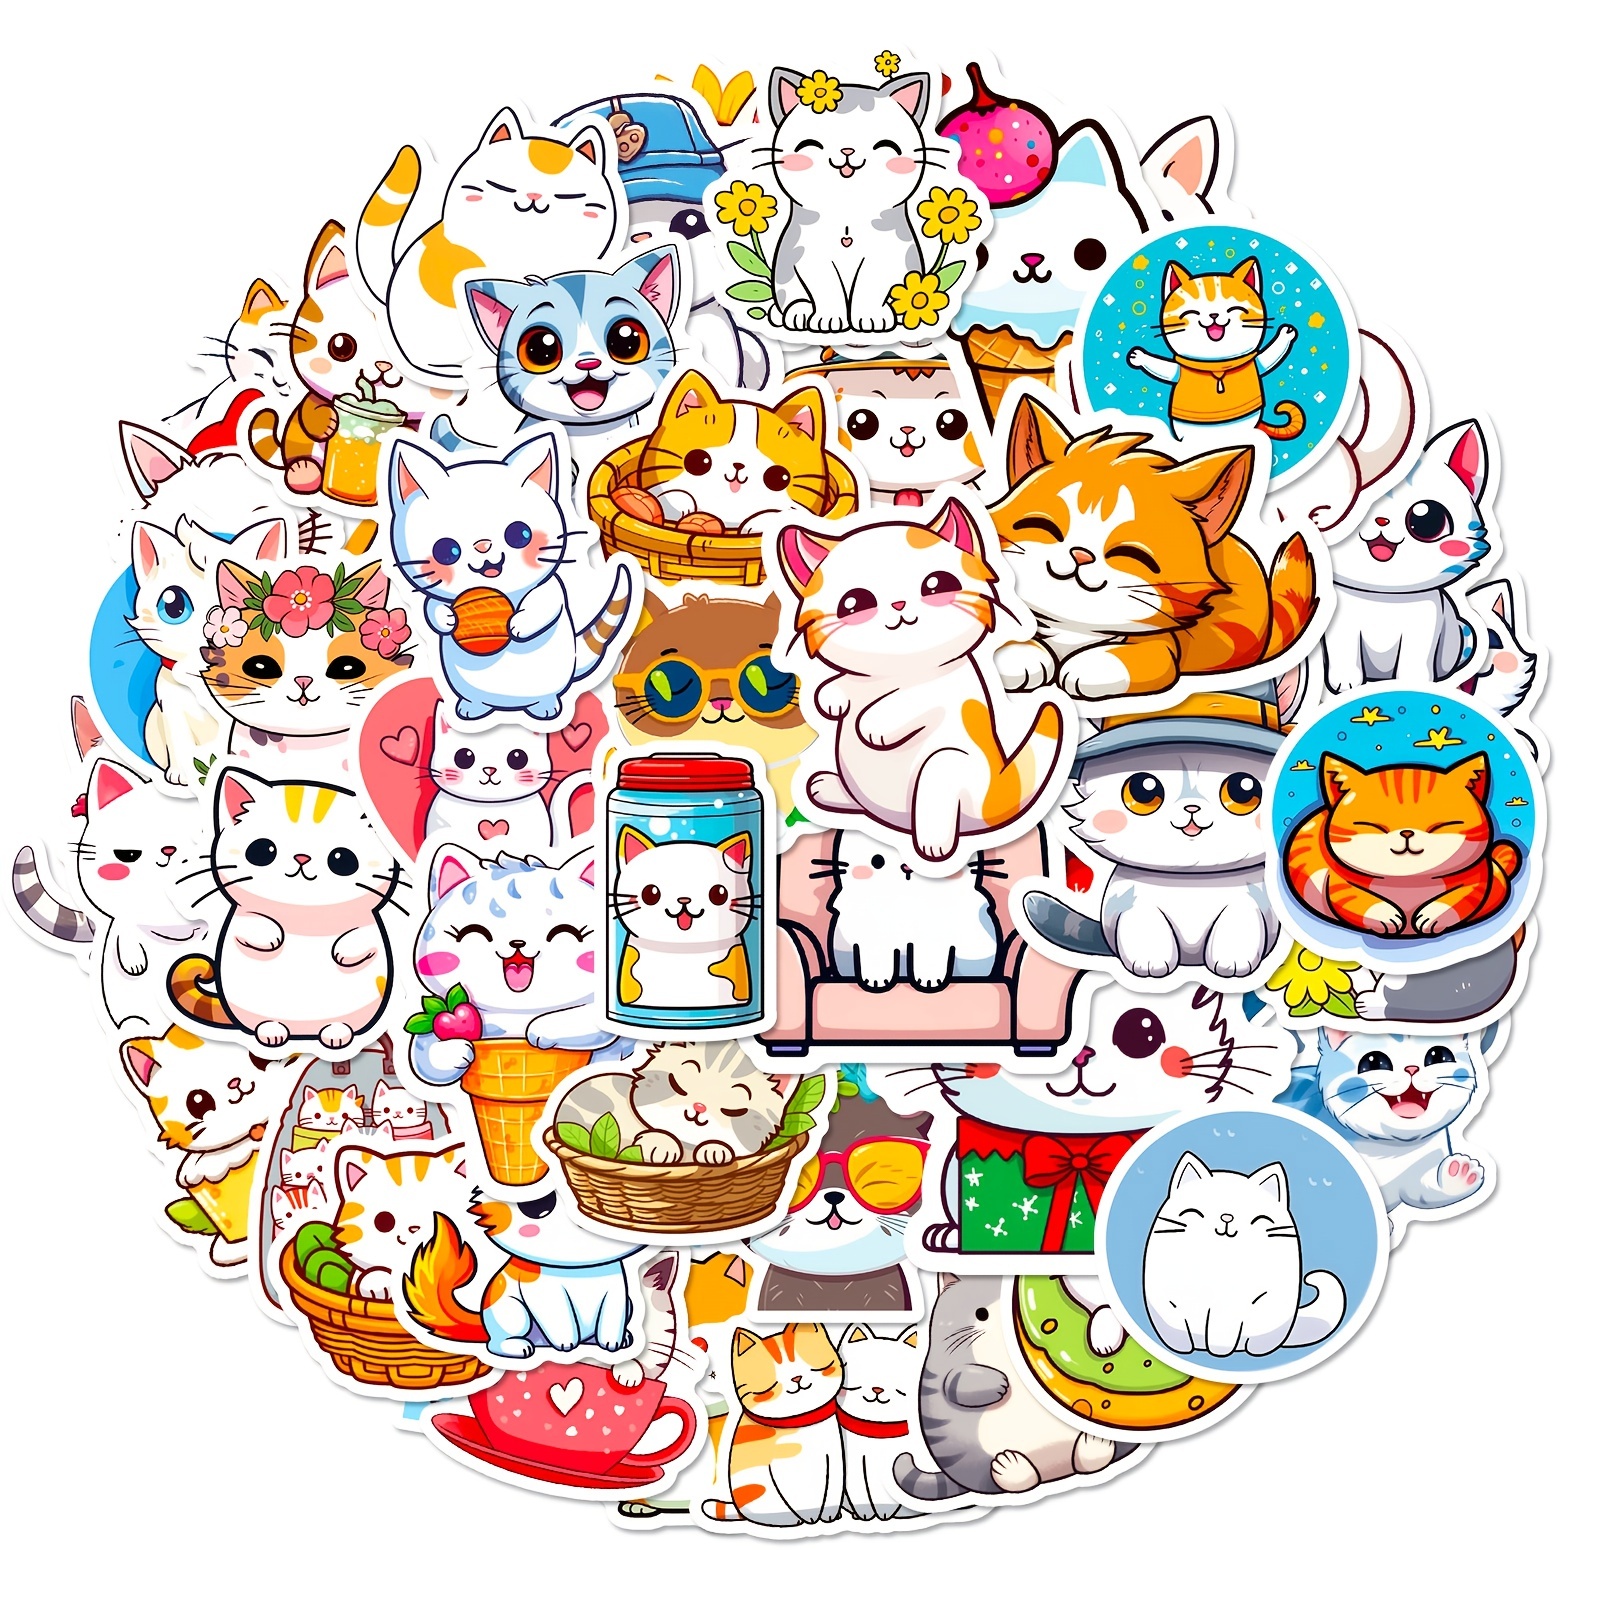 50pcs Funny Meme Cat Stickers for Kids Laptop,Cute Cartoon Aesthetic Vinyl  Stickers Trendy Waterproof Decals for Water Bottle Travel Case Phone